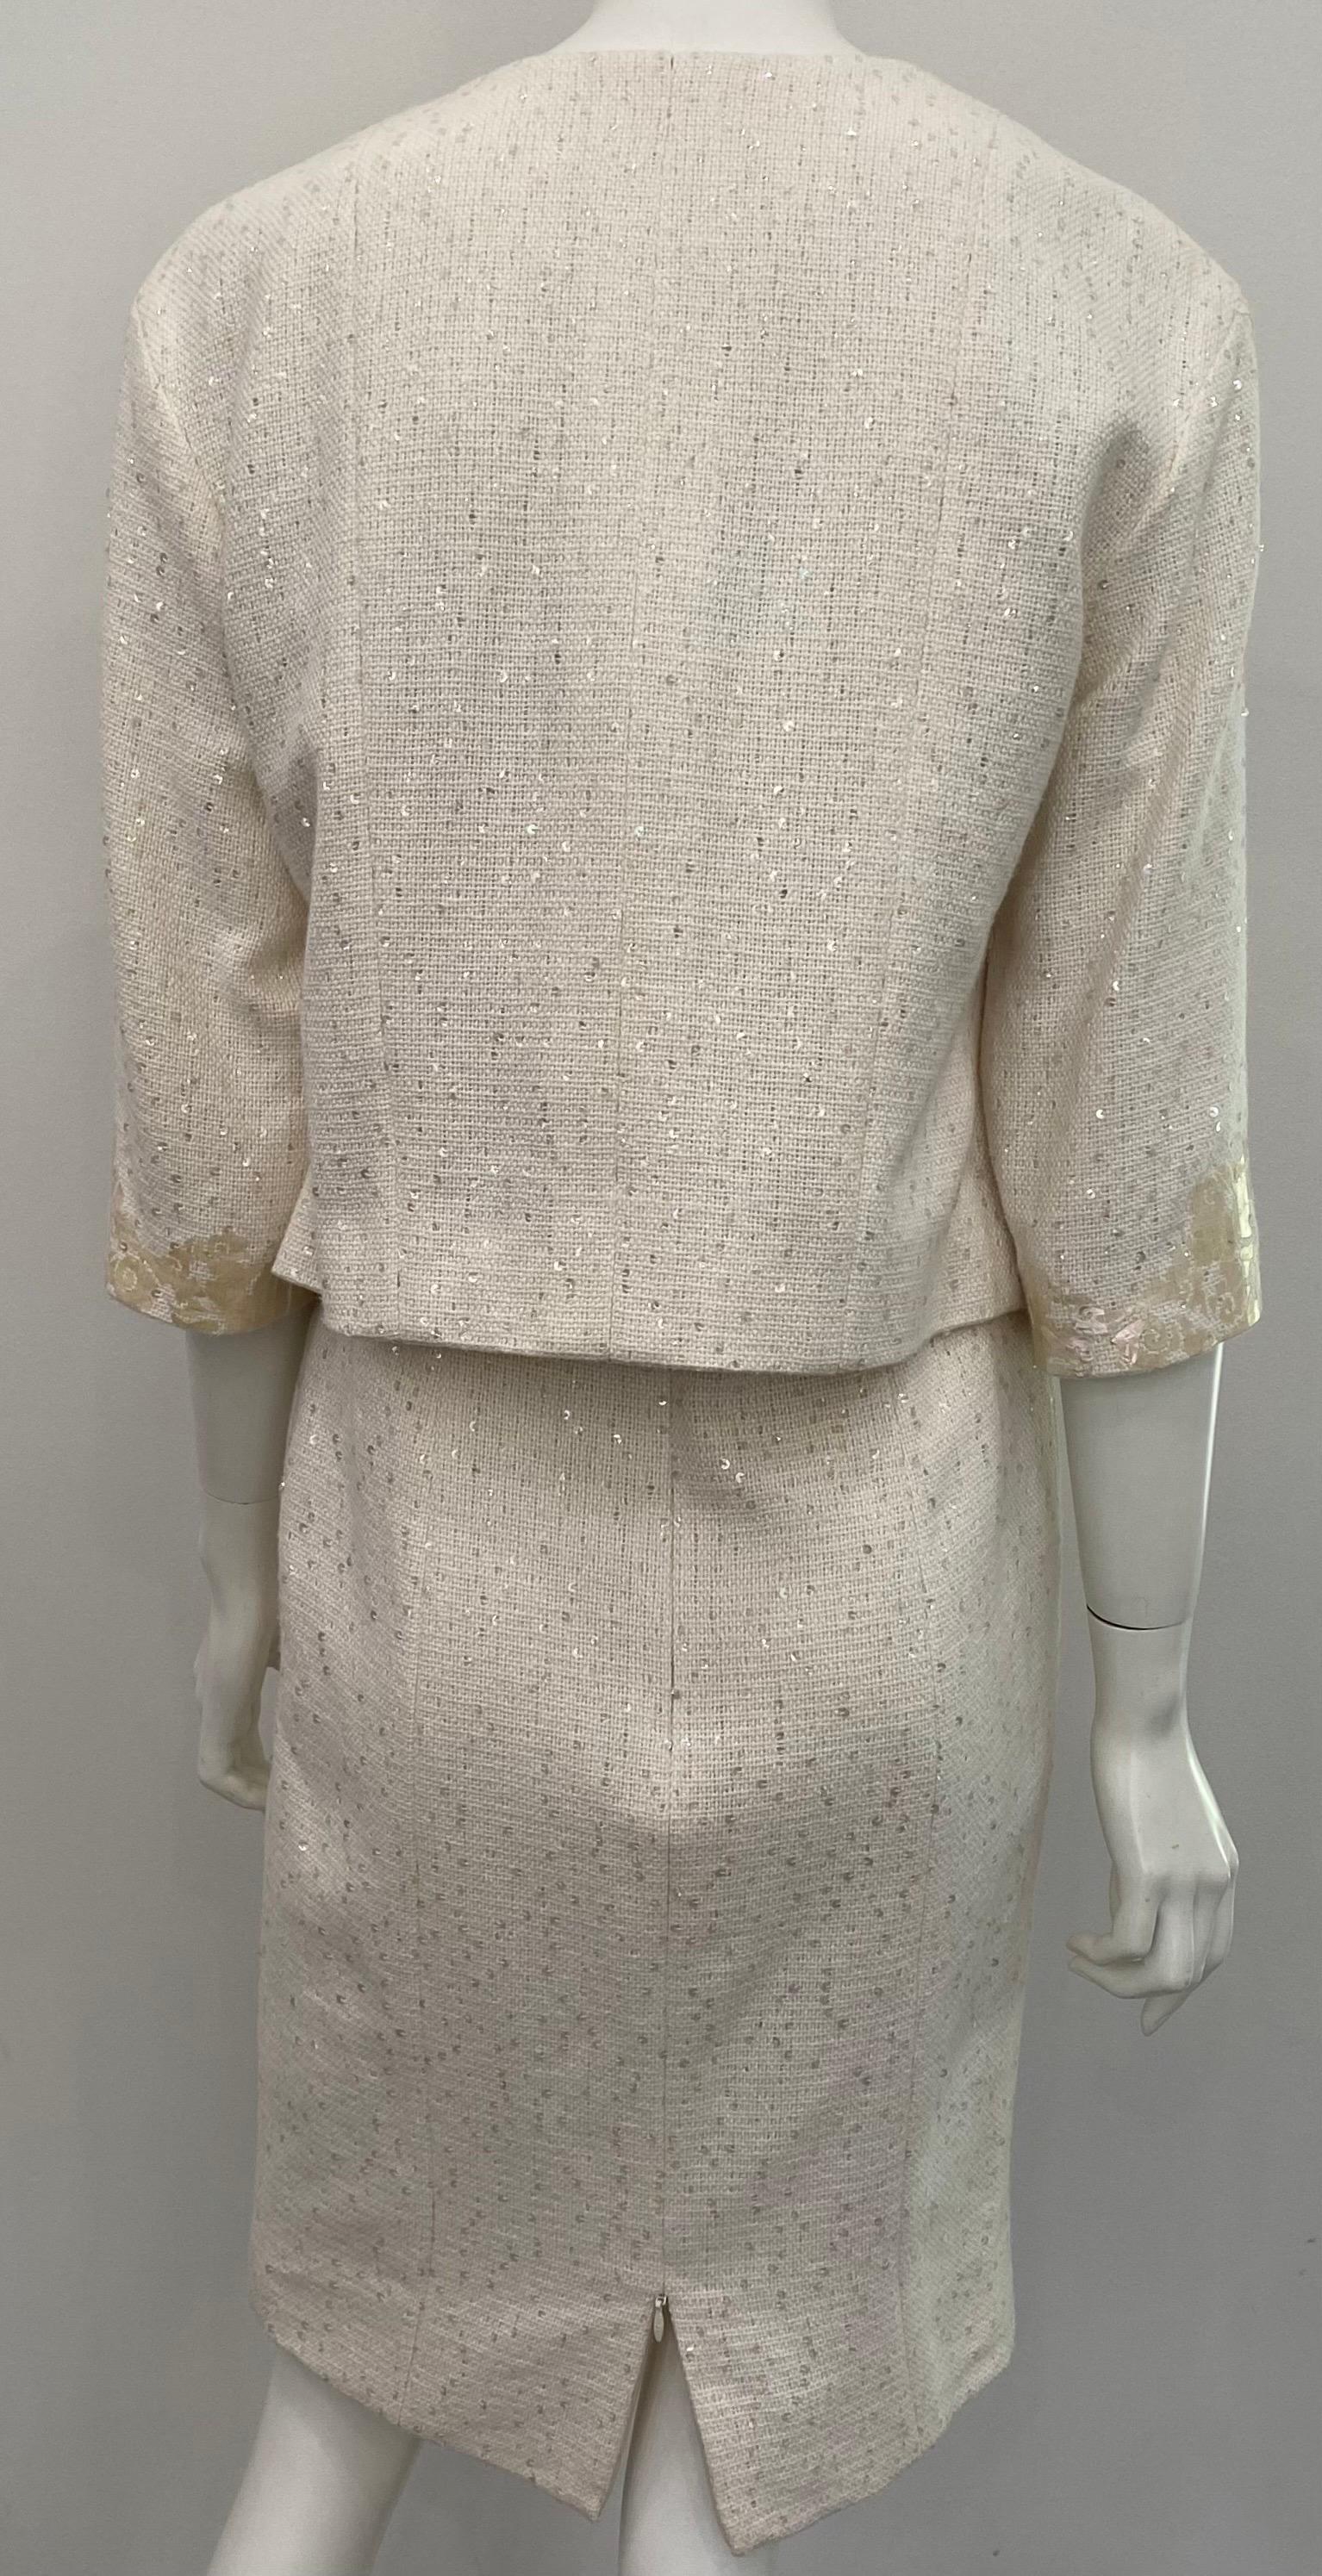 Women's Chanel Runway 2012P Cream Cotton Embellished Strapless Dress with Jacket-Sz 40  For Sale